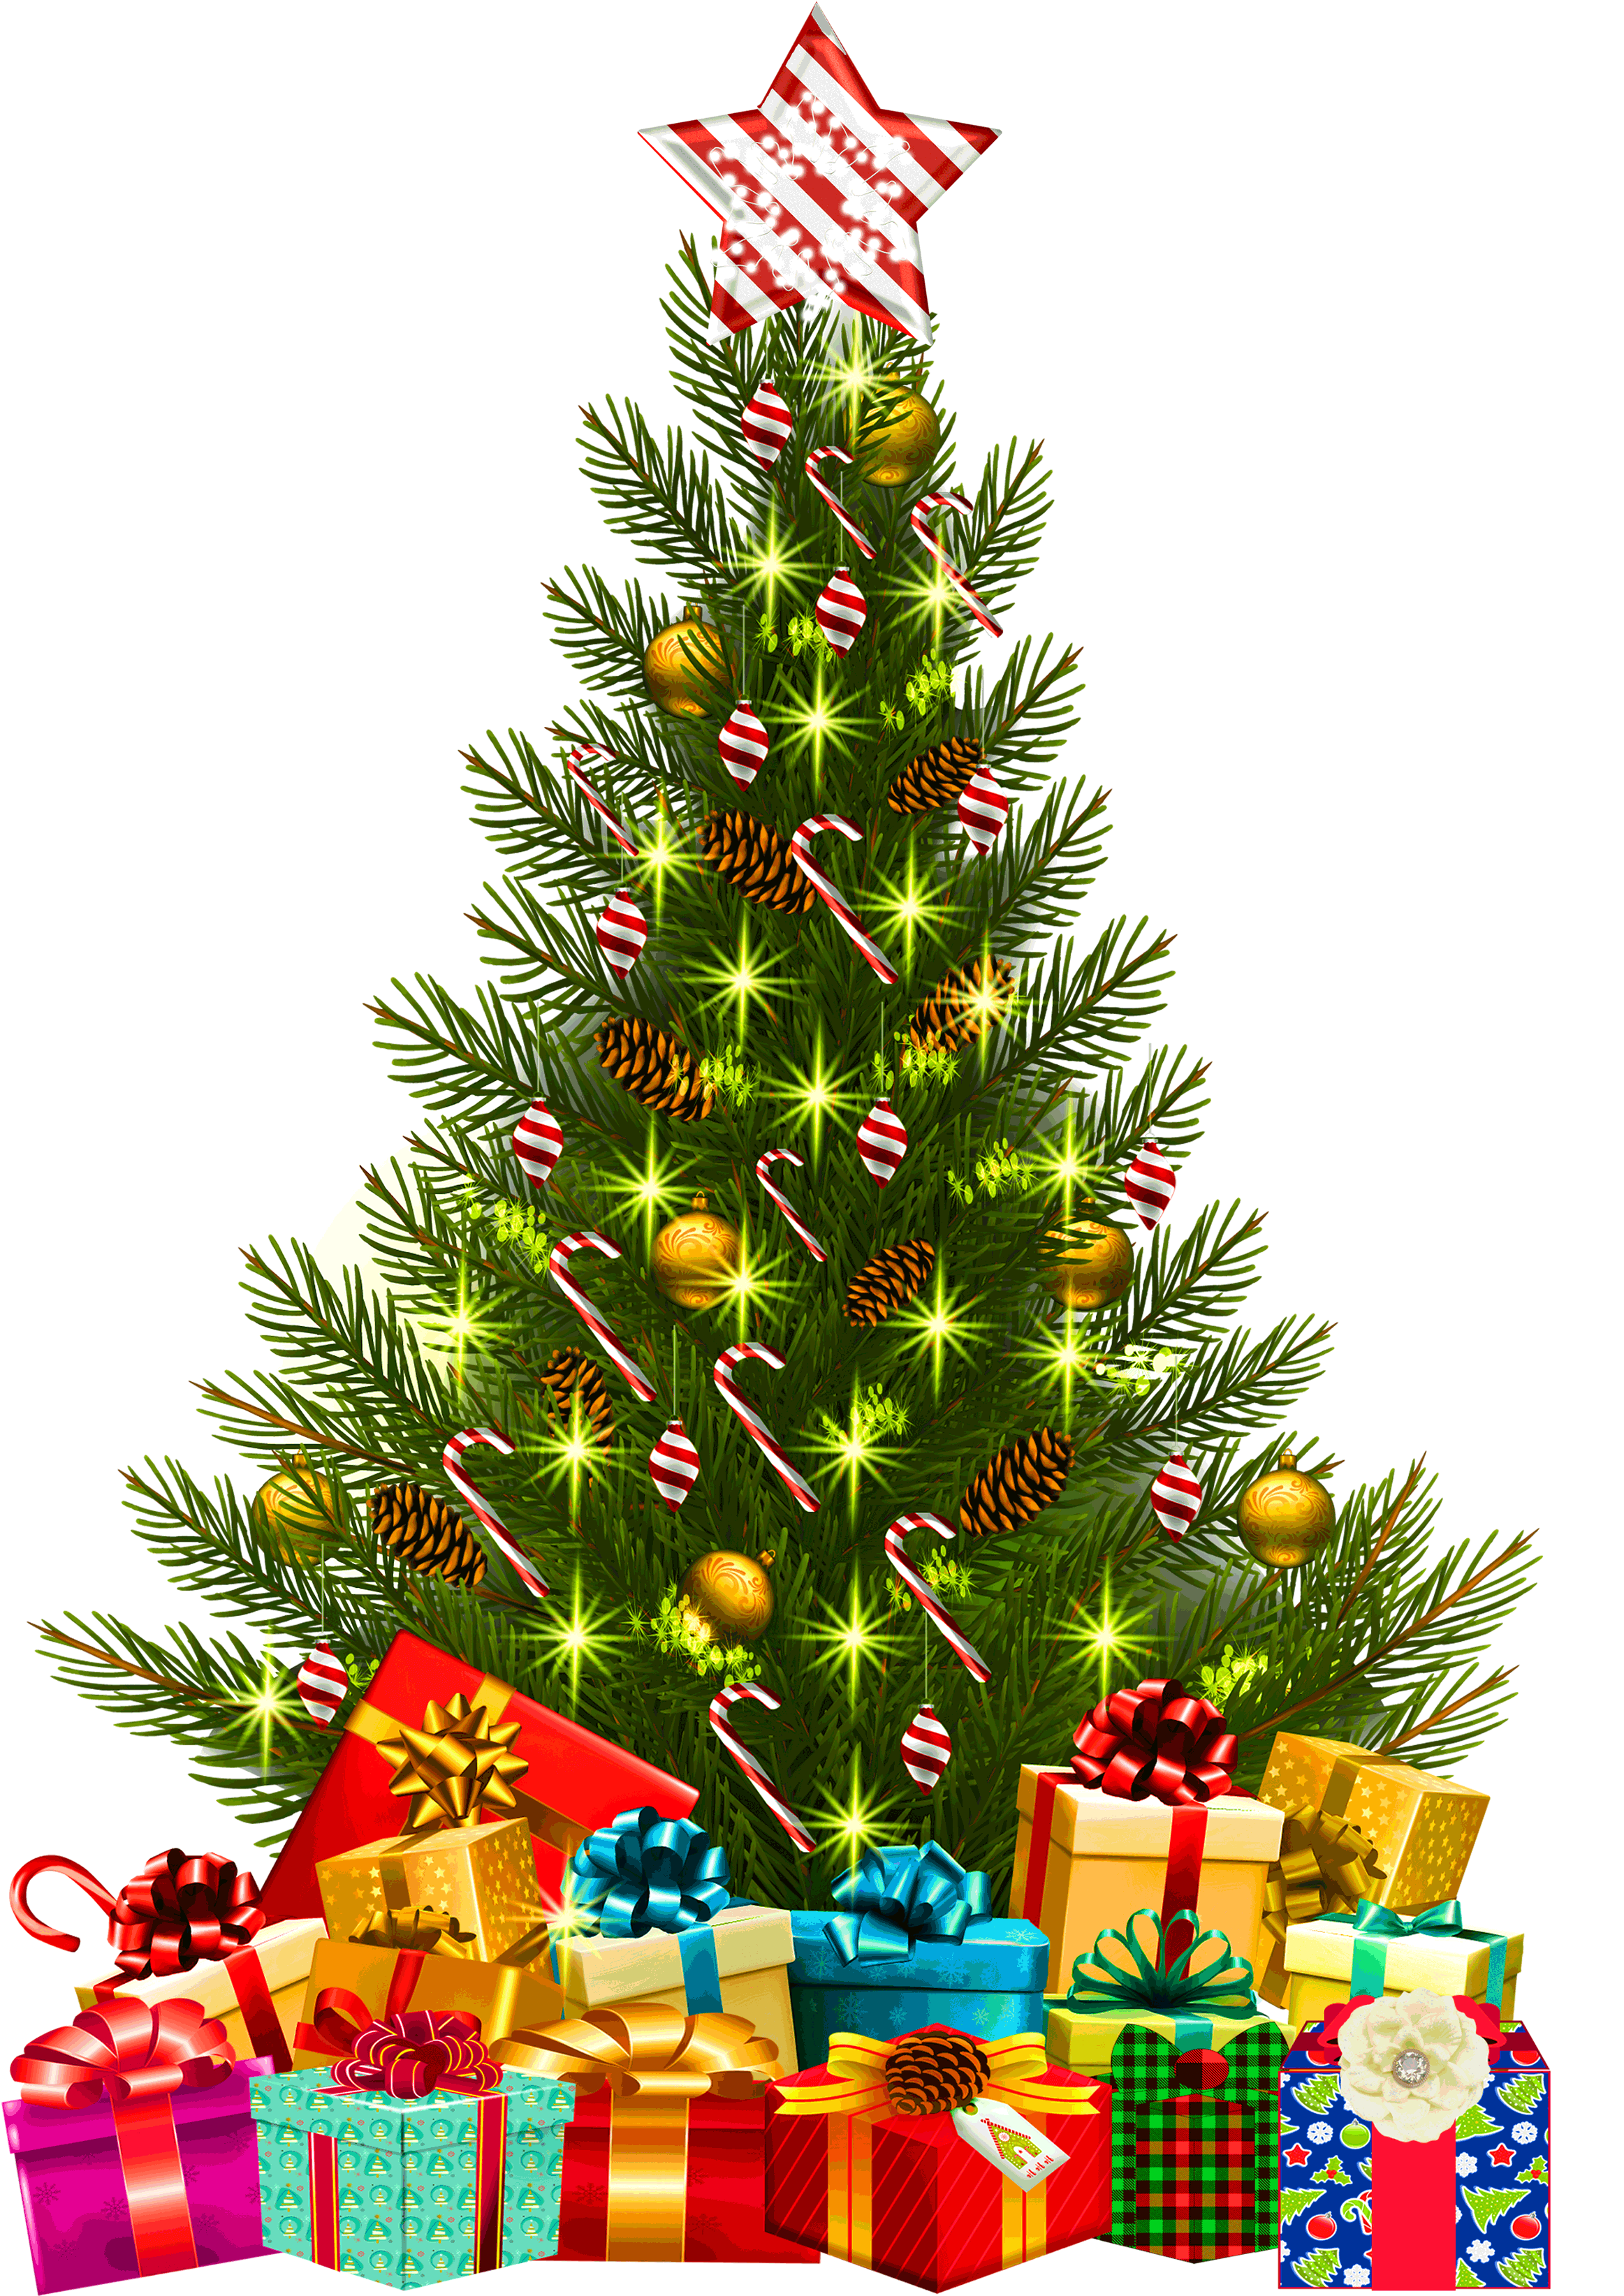 Download Presents Around The Christmas Tree Clipart Large Size Png Image Pikpng